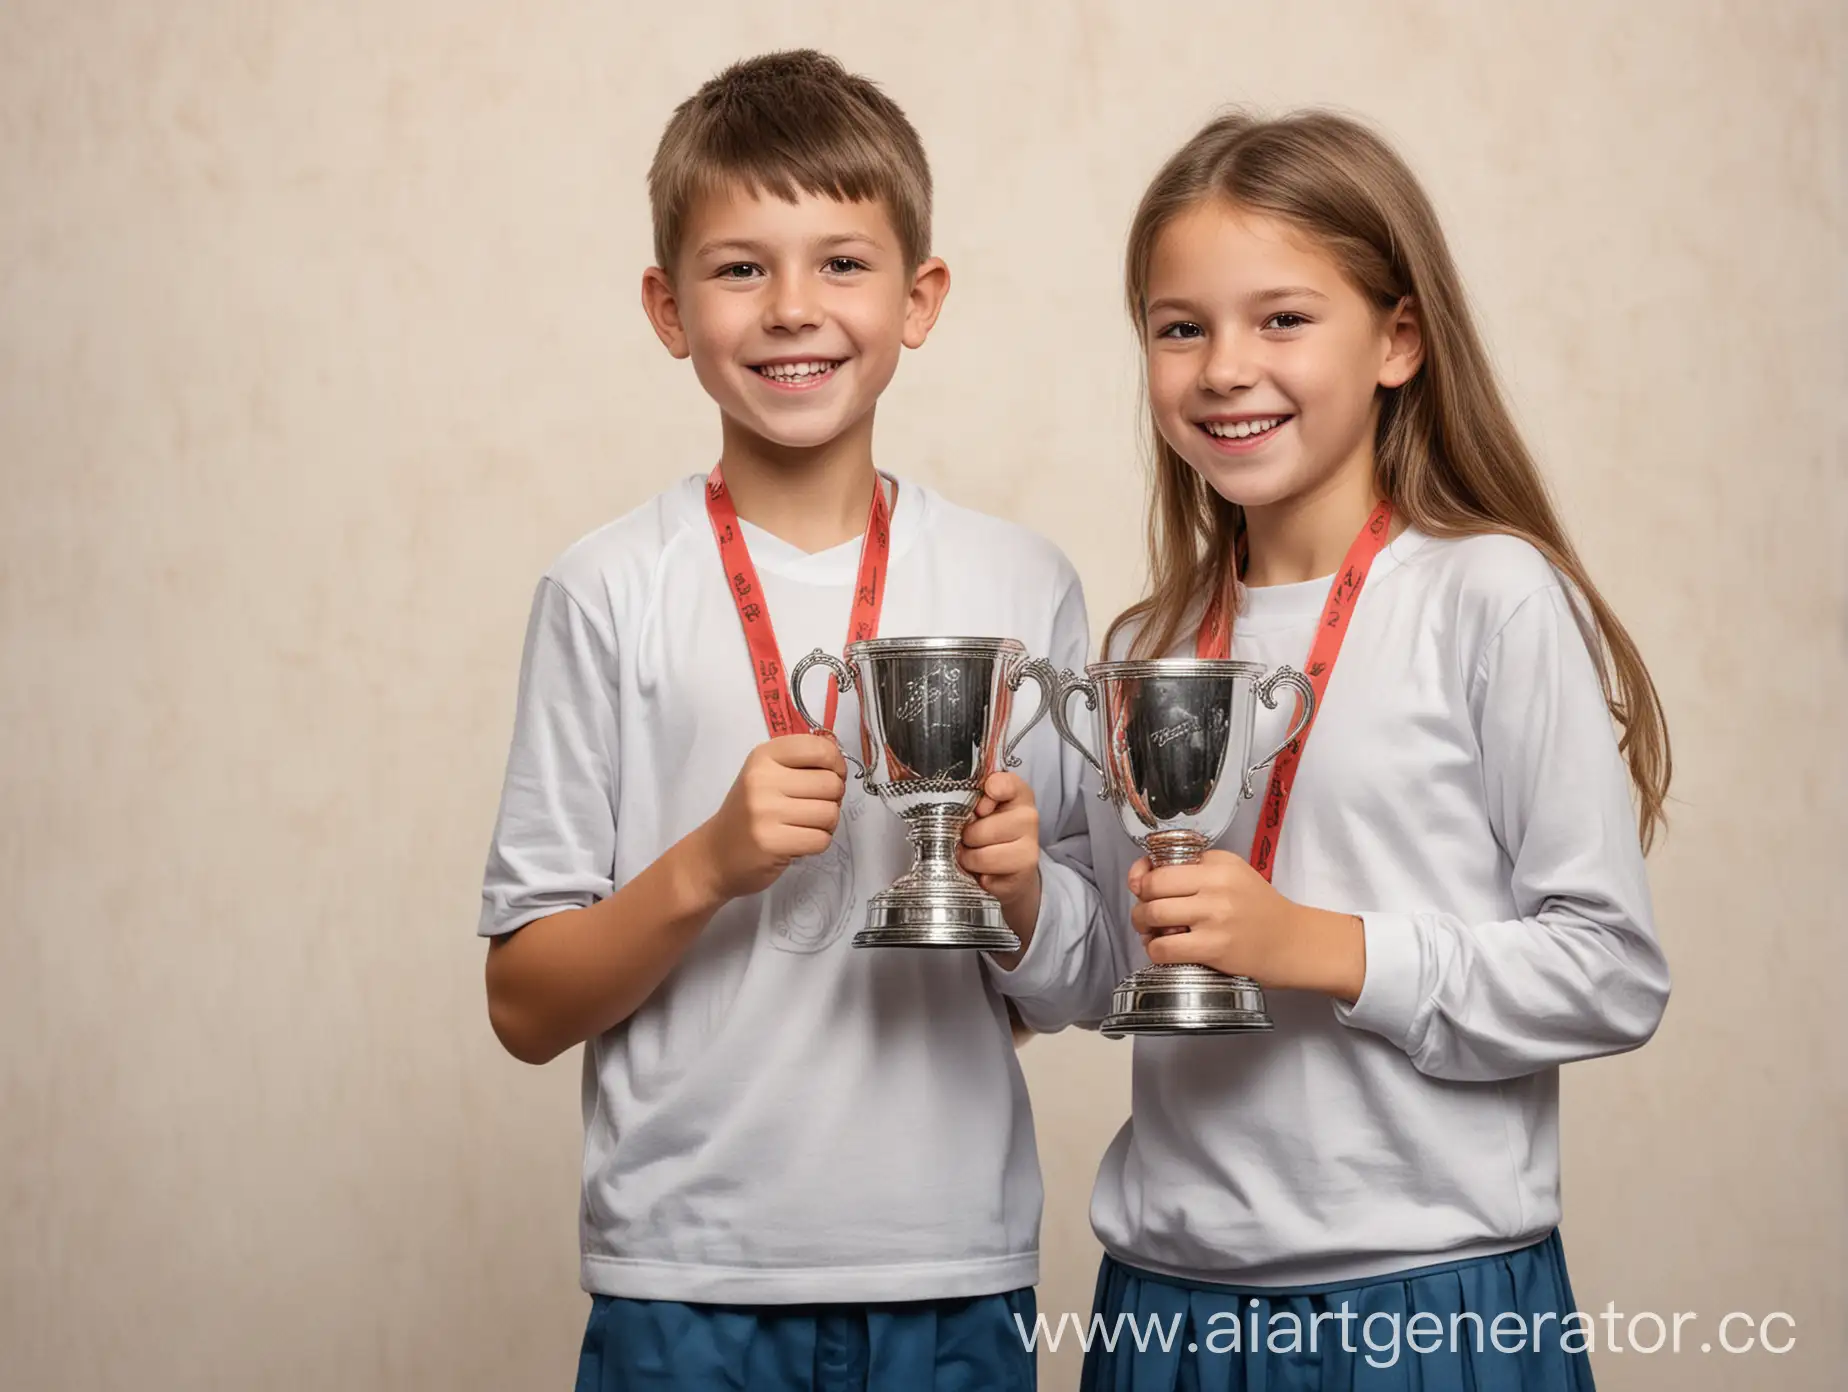 Boy-and-Girl-12-Celebrating-Victory-with-Trophy-in-Hand